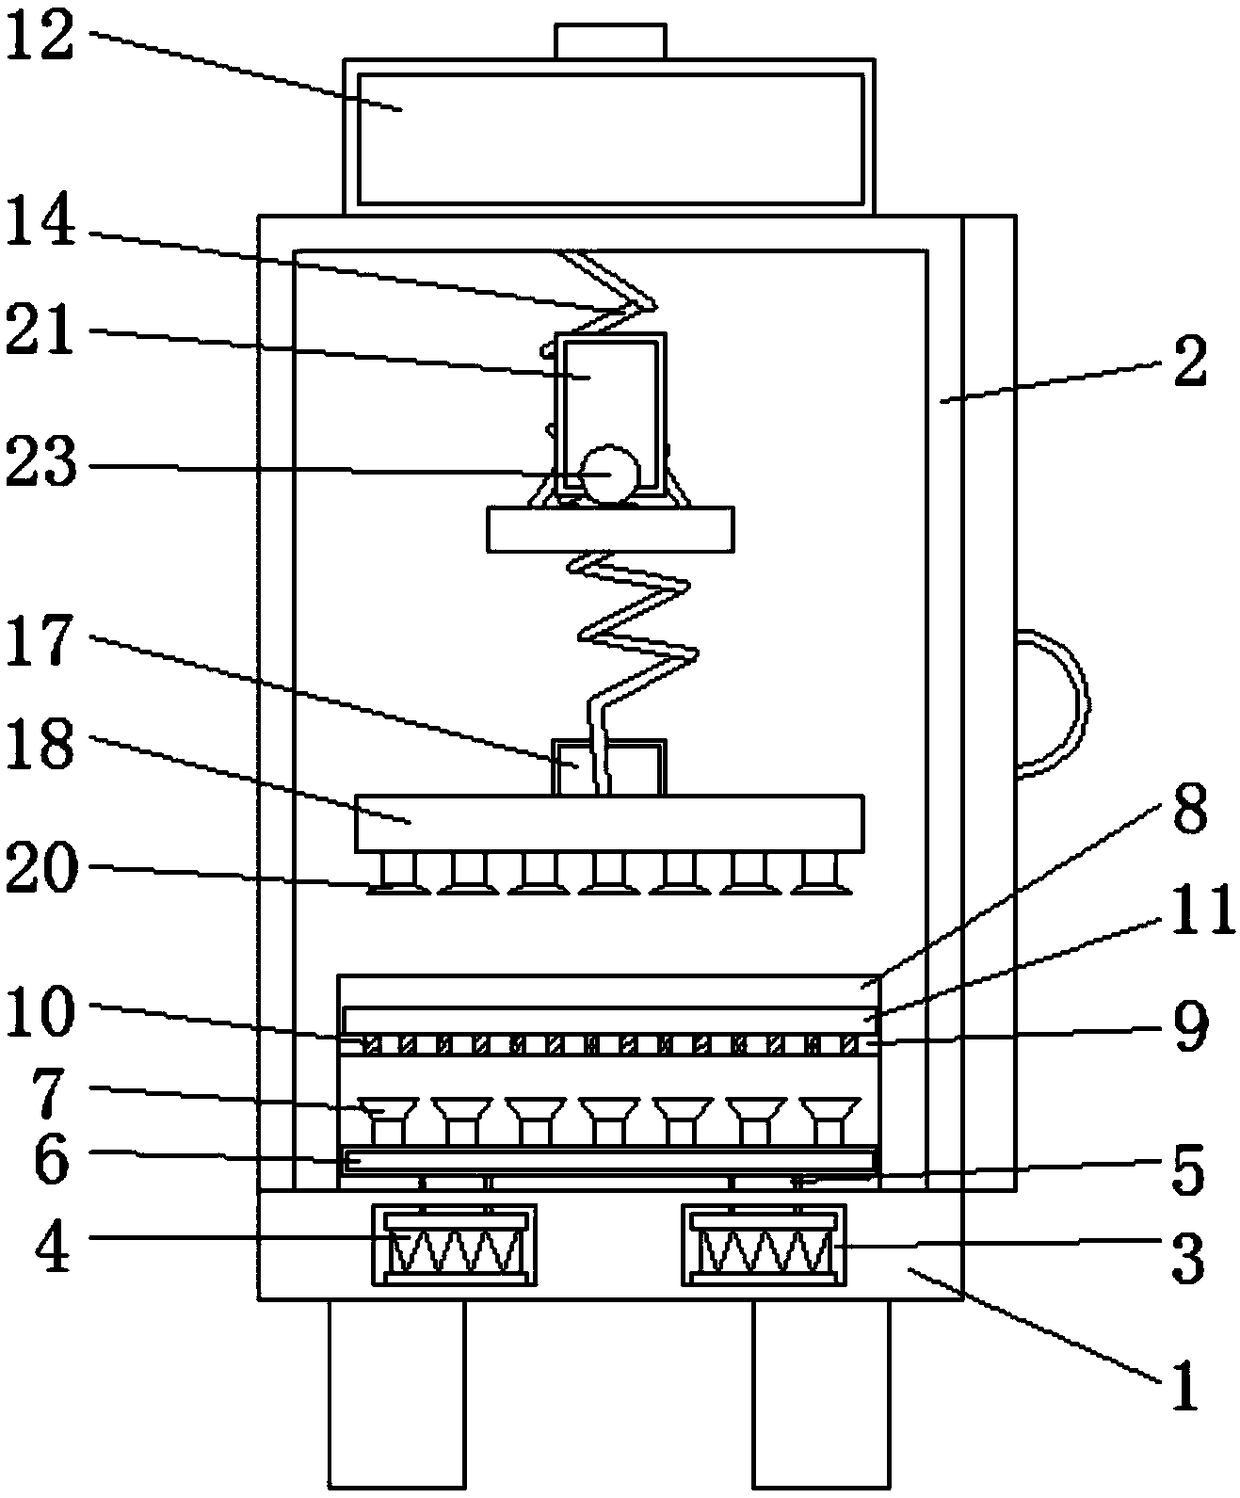 Hot coating device for accelerating cooling